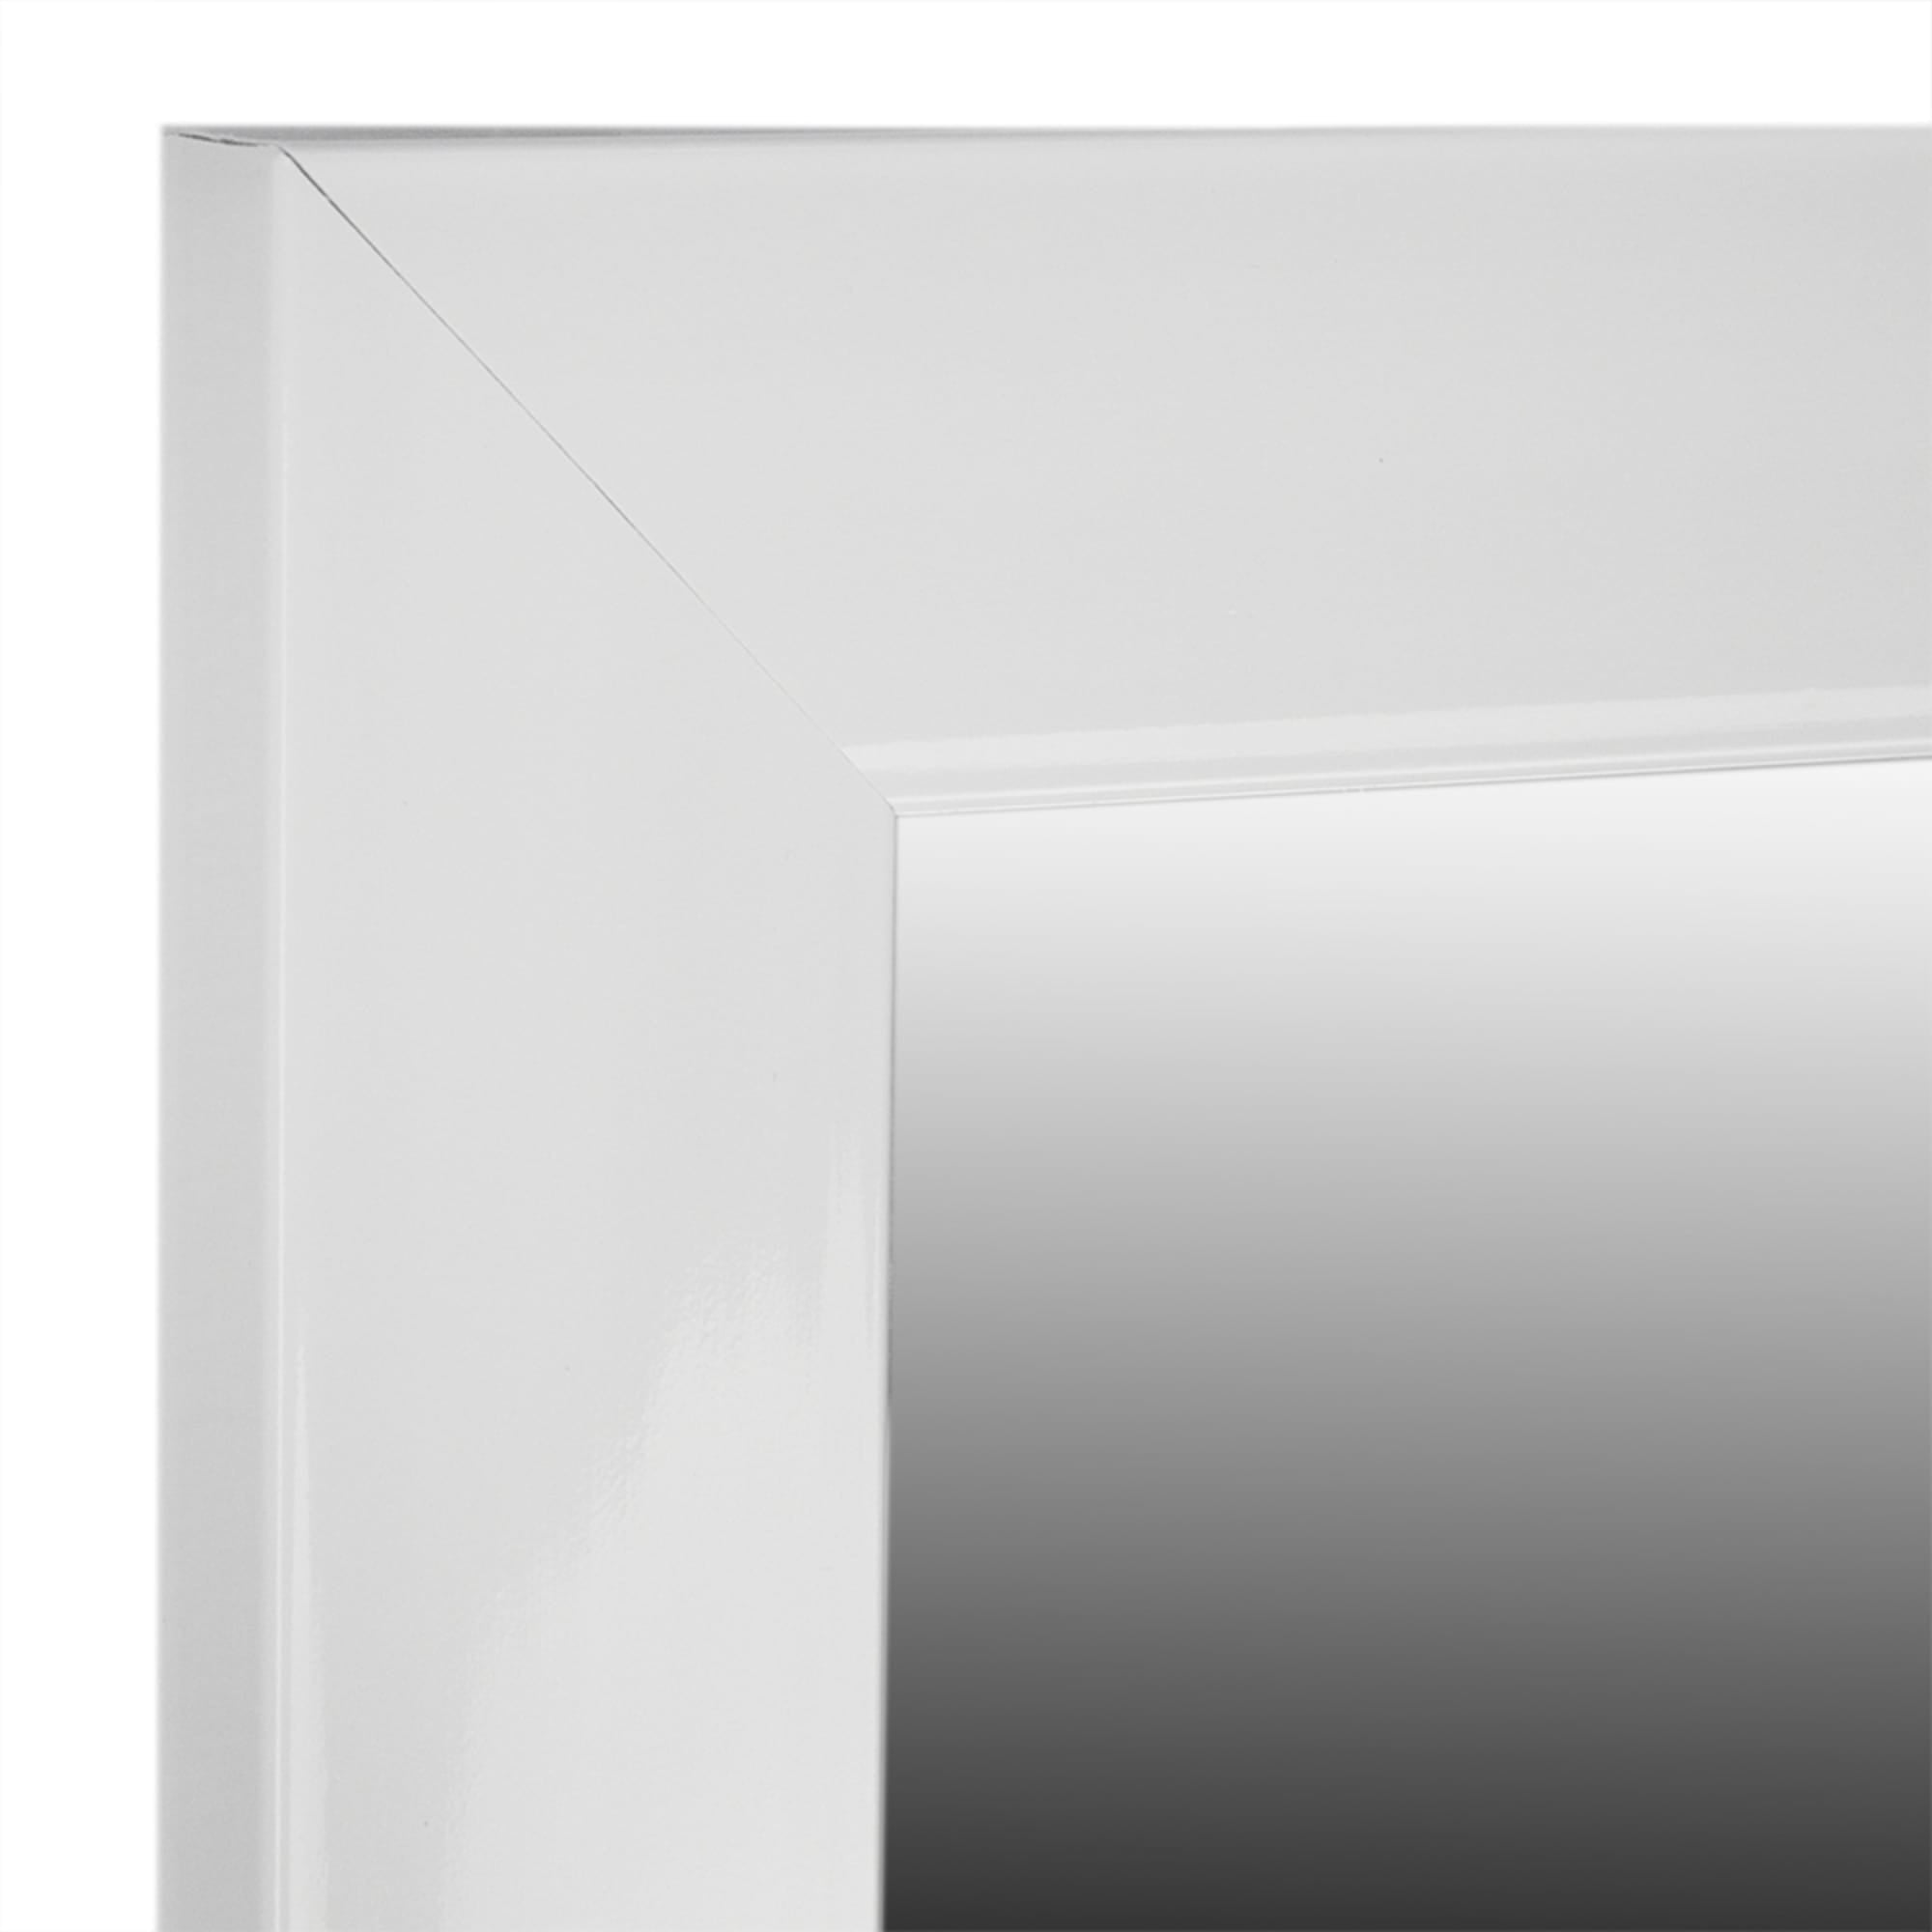 Home Basics Over The Door Mirror, White $12.00 EACH, CASE PACK OF 6